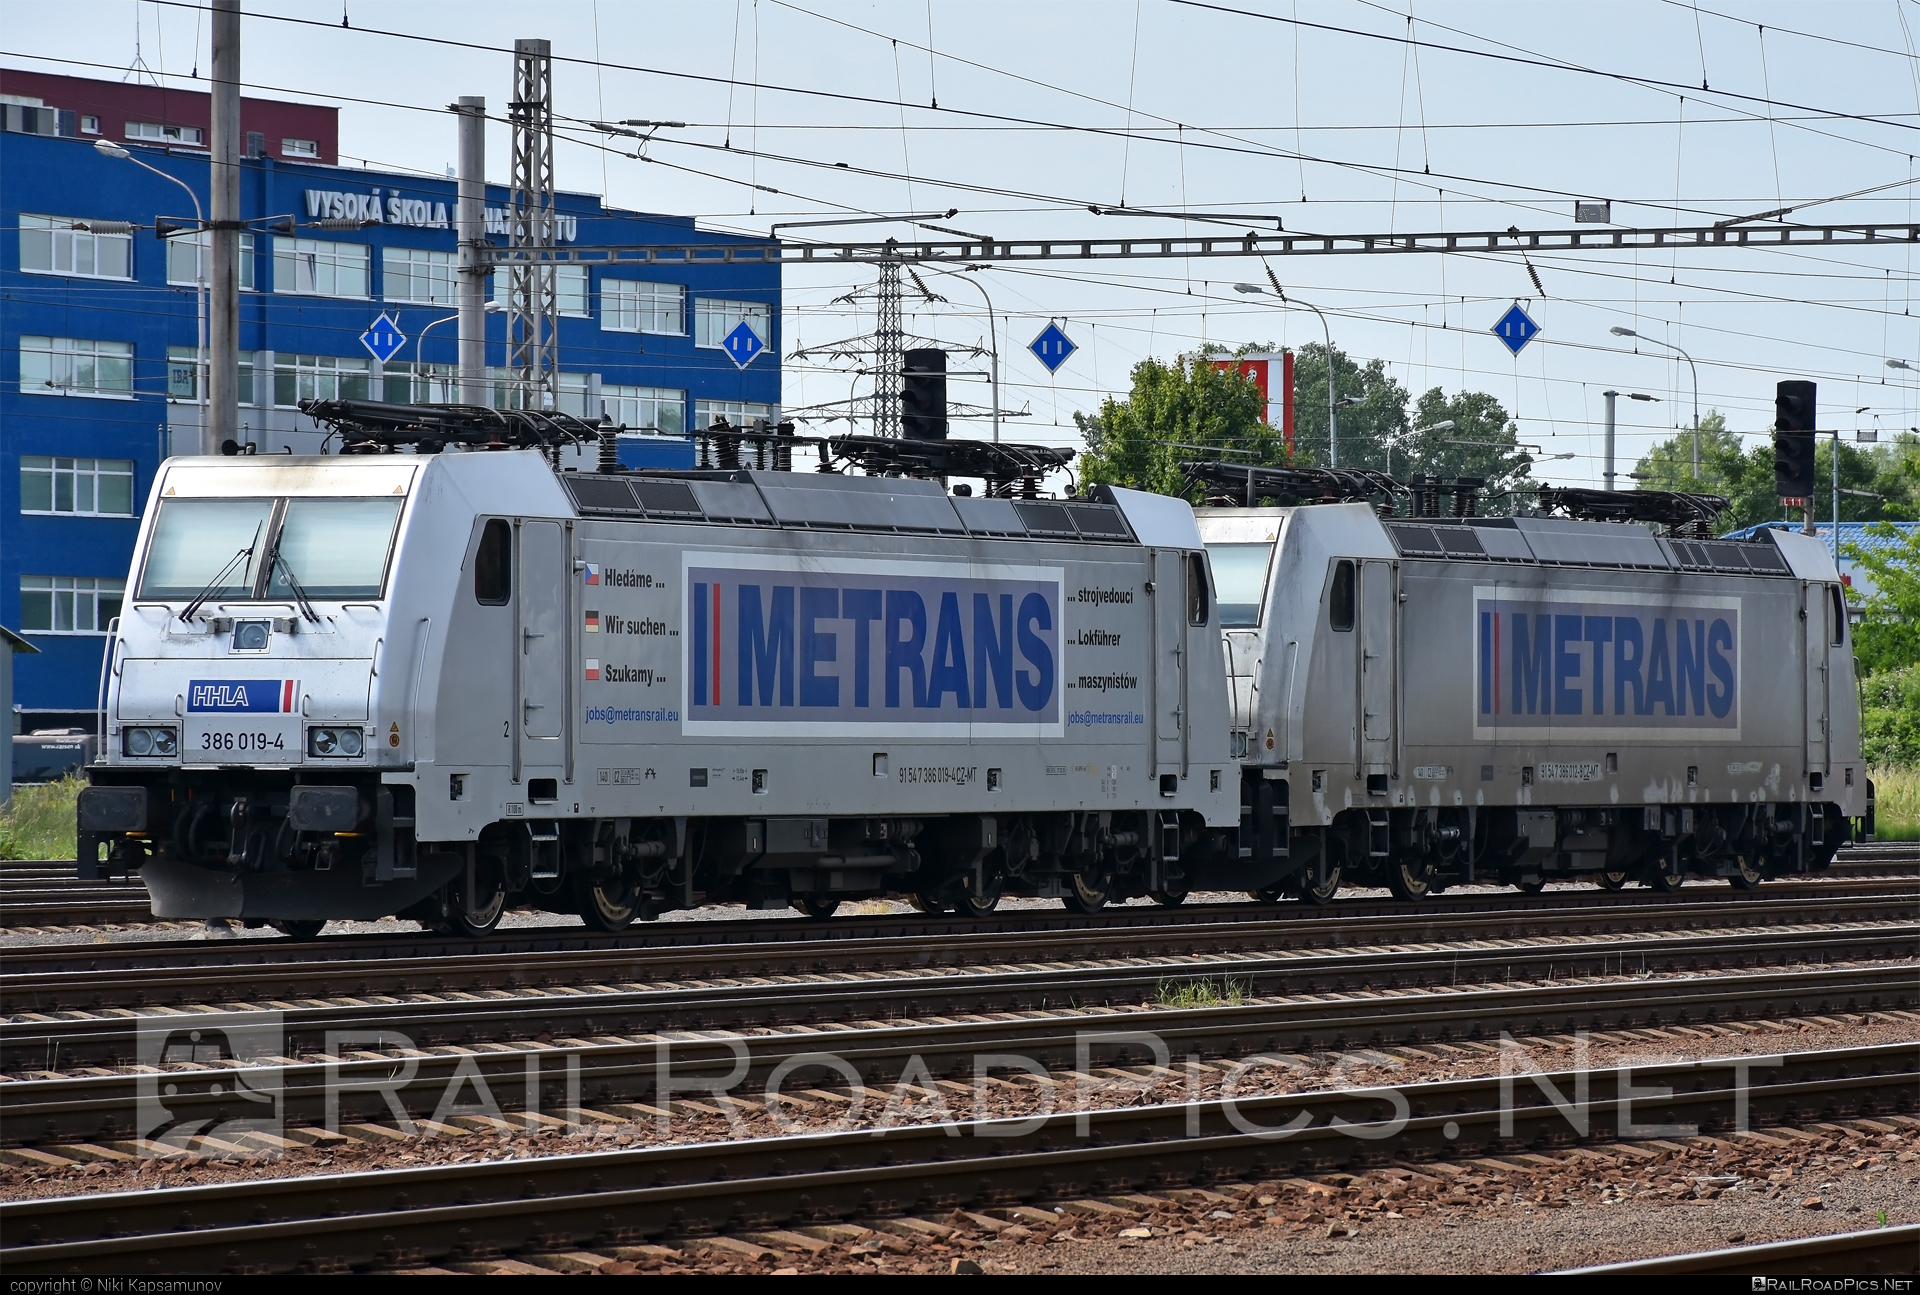 Bombardier TRAXX F140 MS - 386 019-4 operated by METRANS Rail s.r.o. #bombardier #bombardiertraxx #hhla #metrans #metransrail #traxx #traxxf140 #traxxf140ms